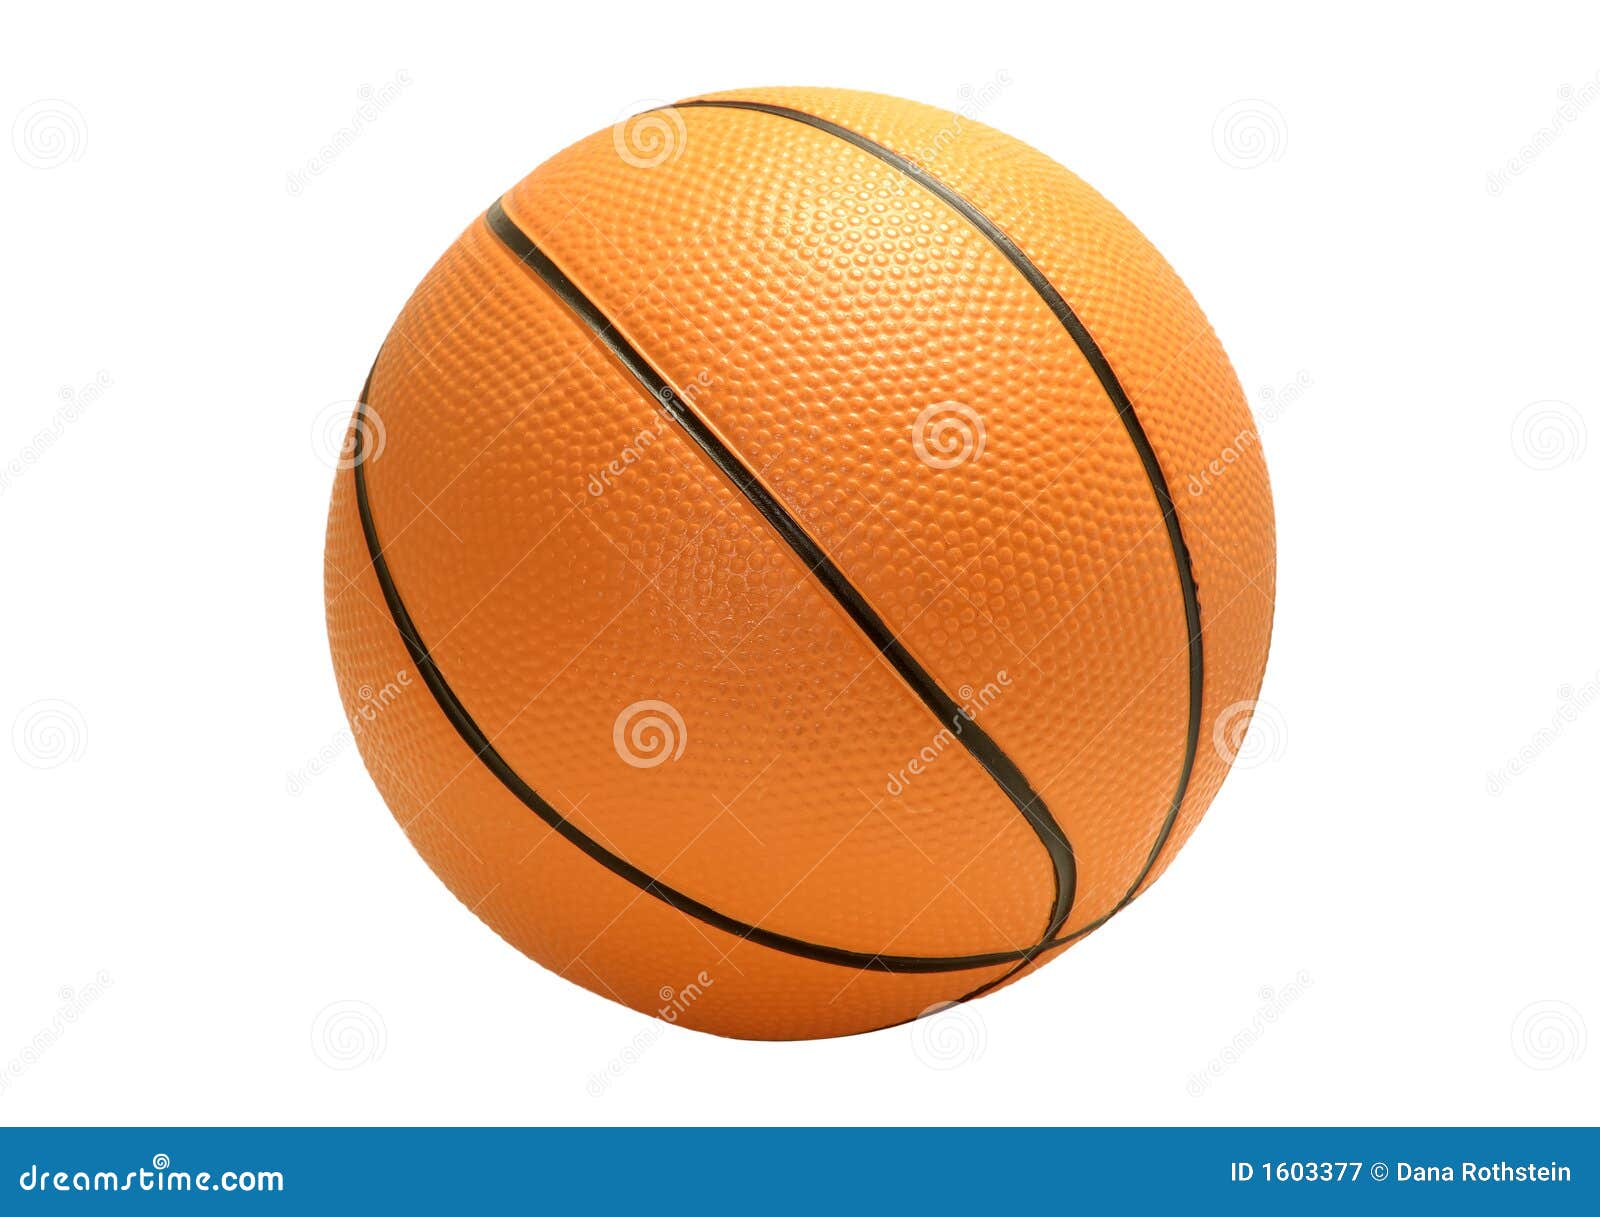 Basketball stock image. Image of ball, court, catch, game - 1603377